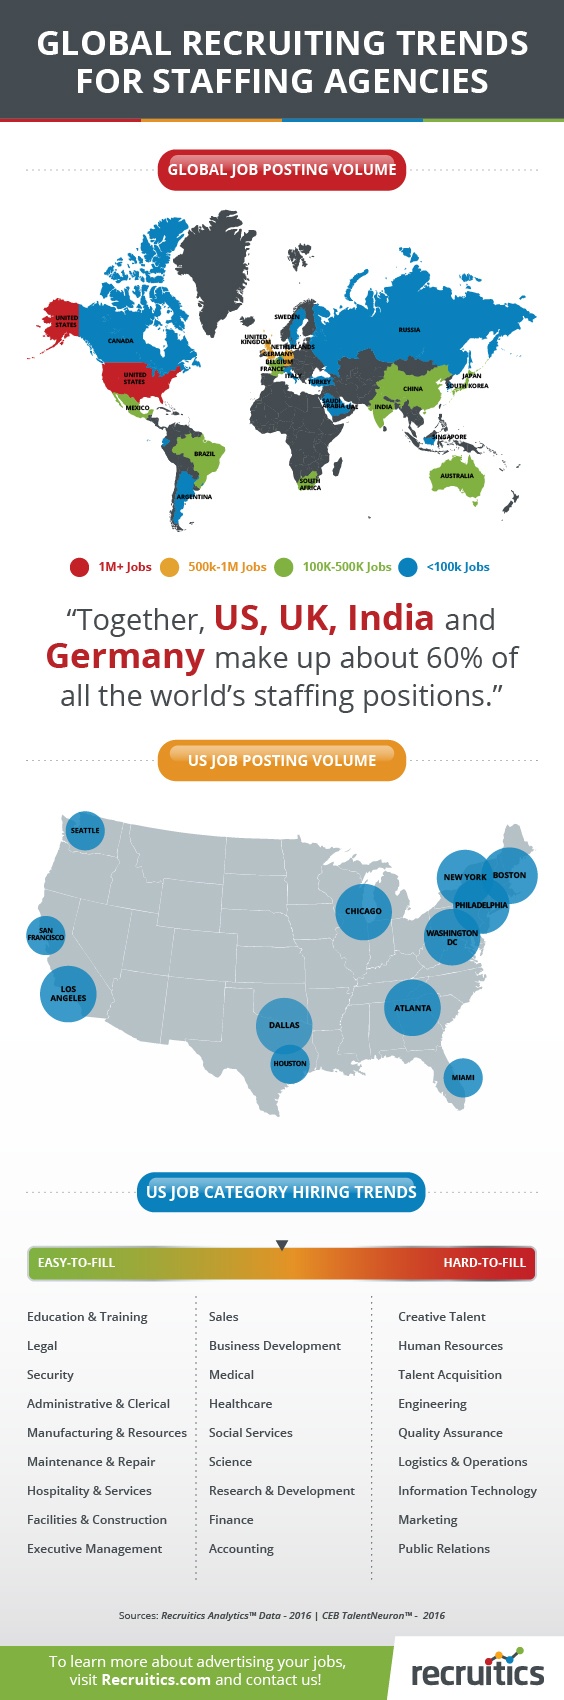 Global Recruiting Trends for Staffing Agencies